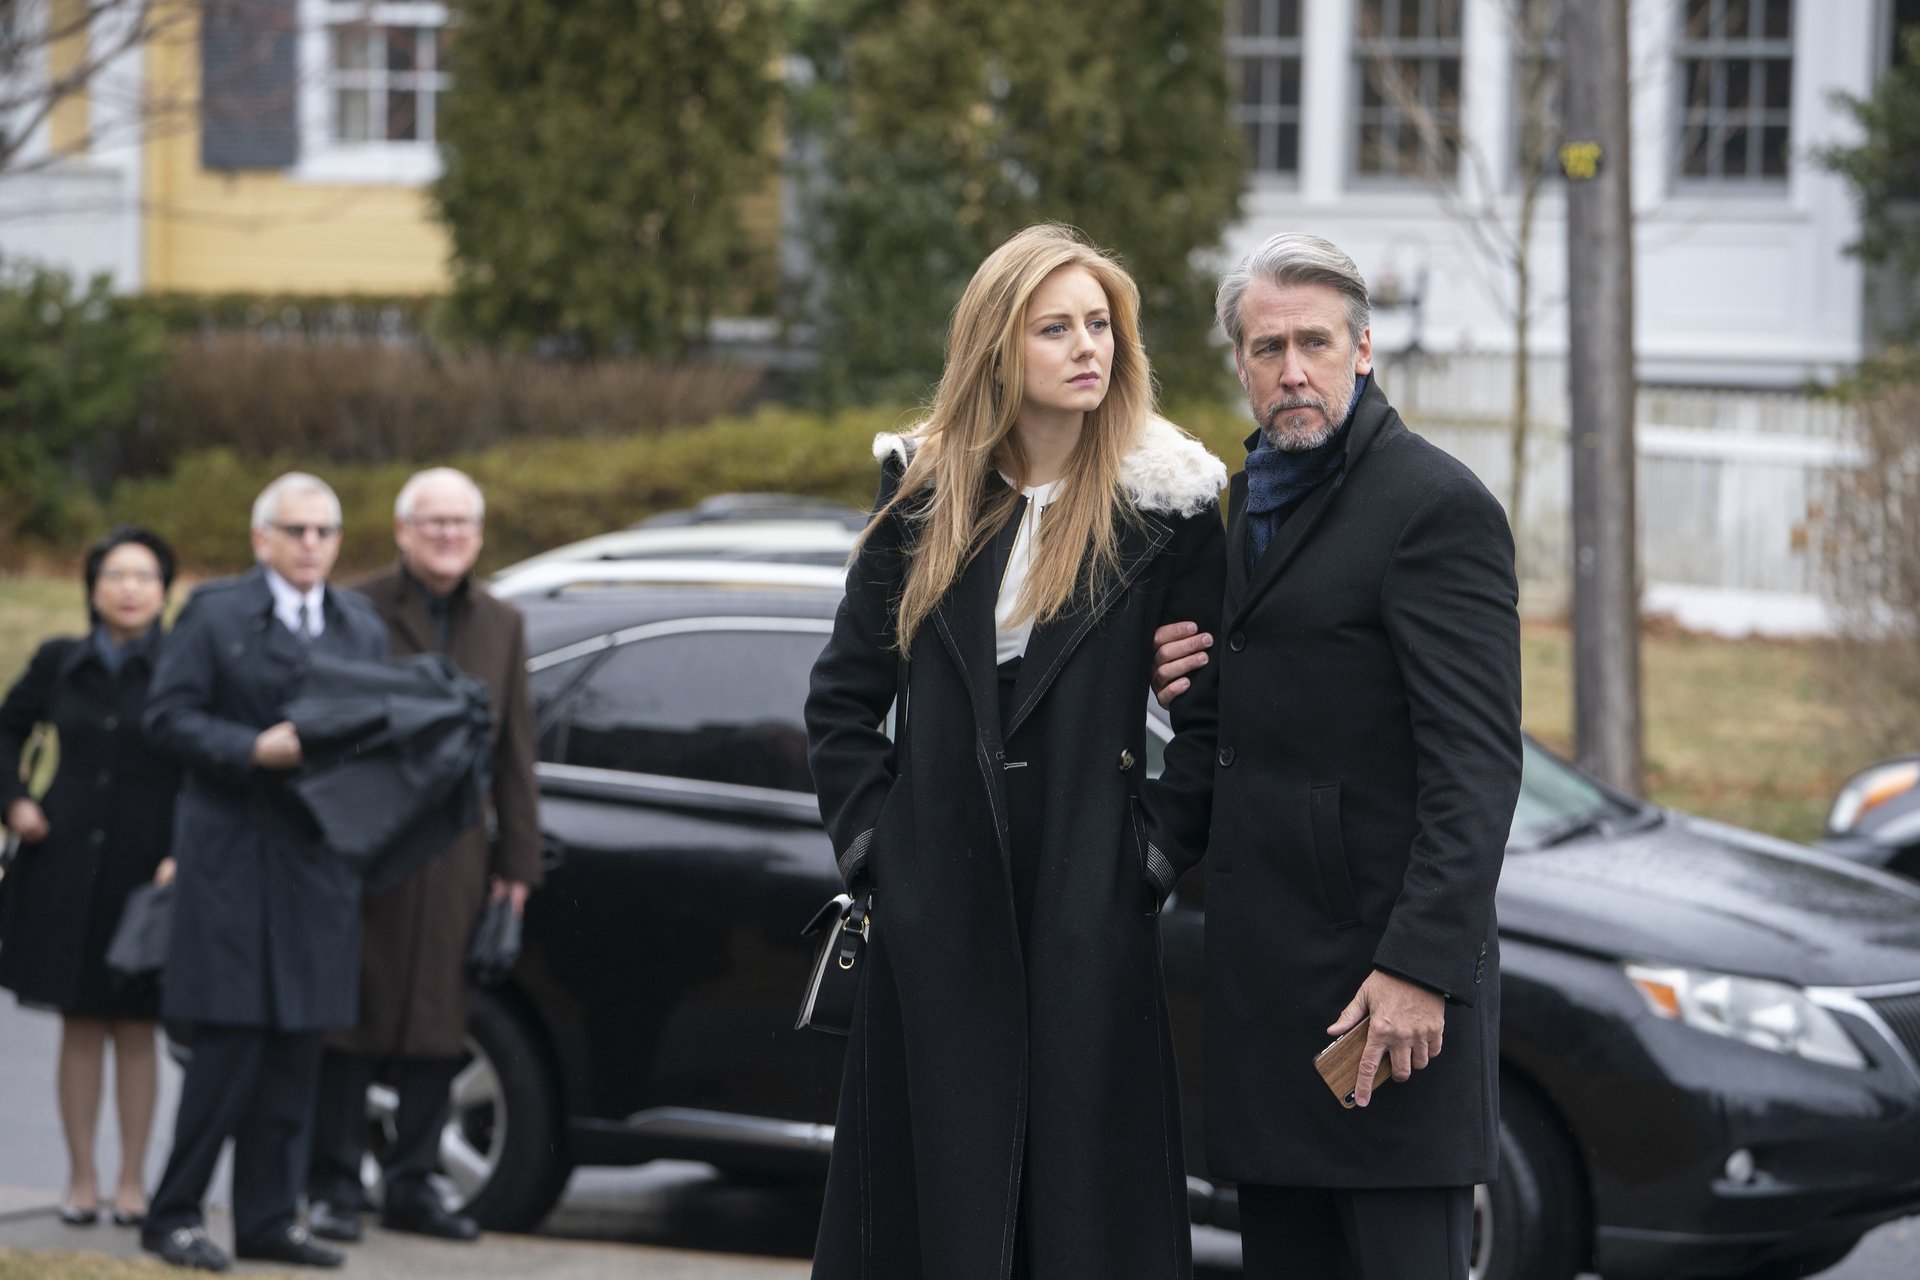 Alan Ruck and Justine Lupe wear black coats and stand outside in Succession.